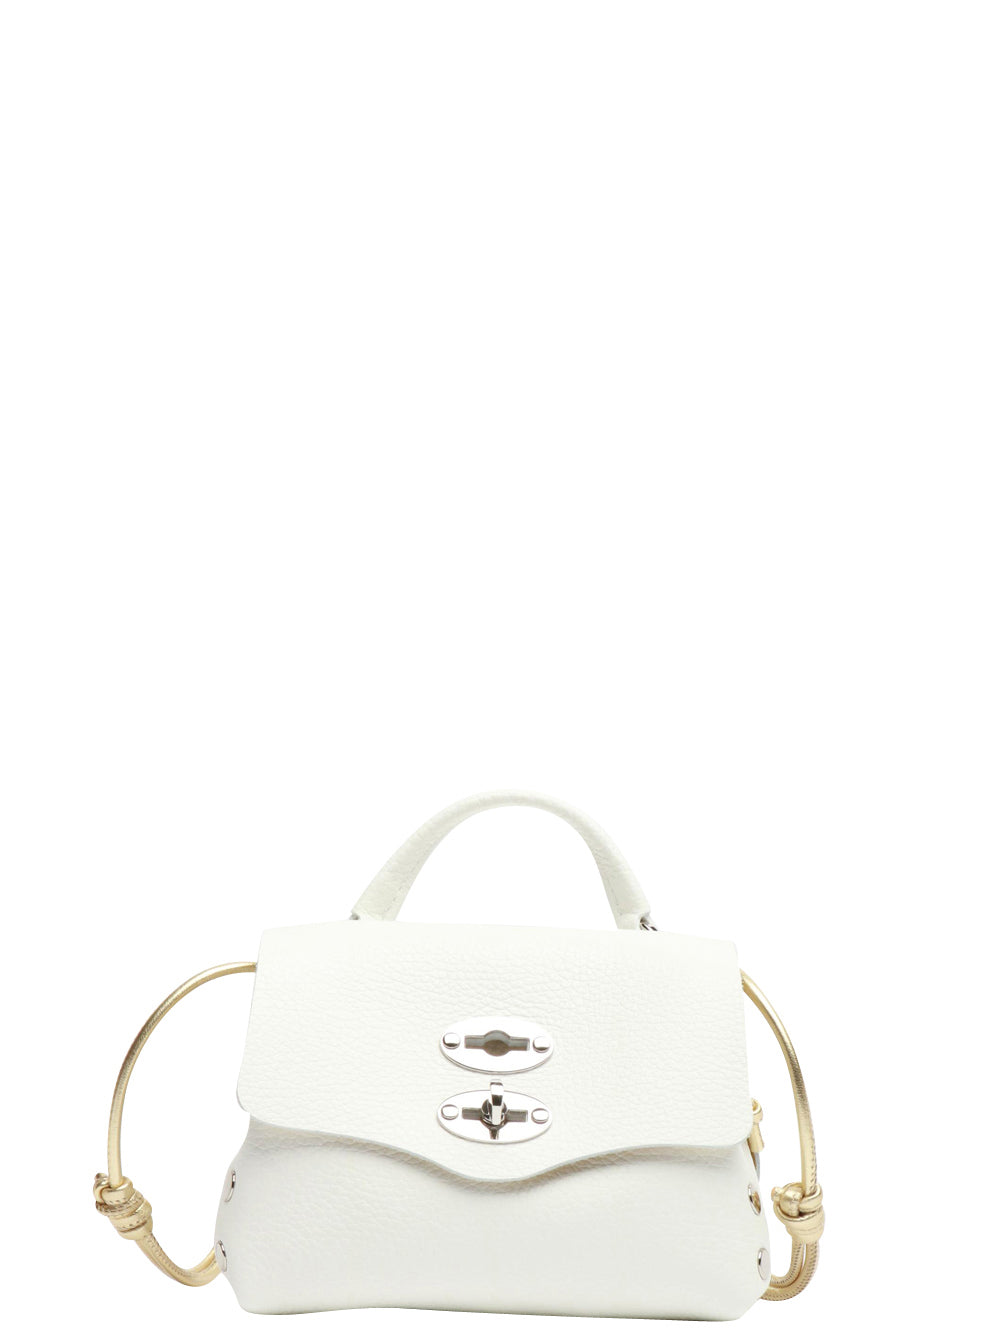 Postina Daily Candy SBaby Handbag in White Leather